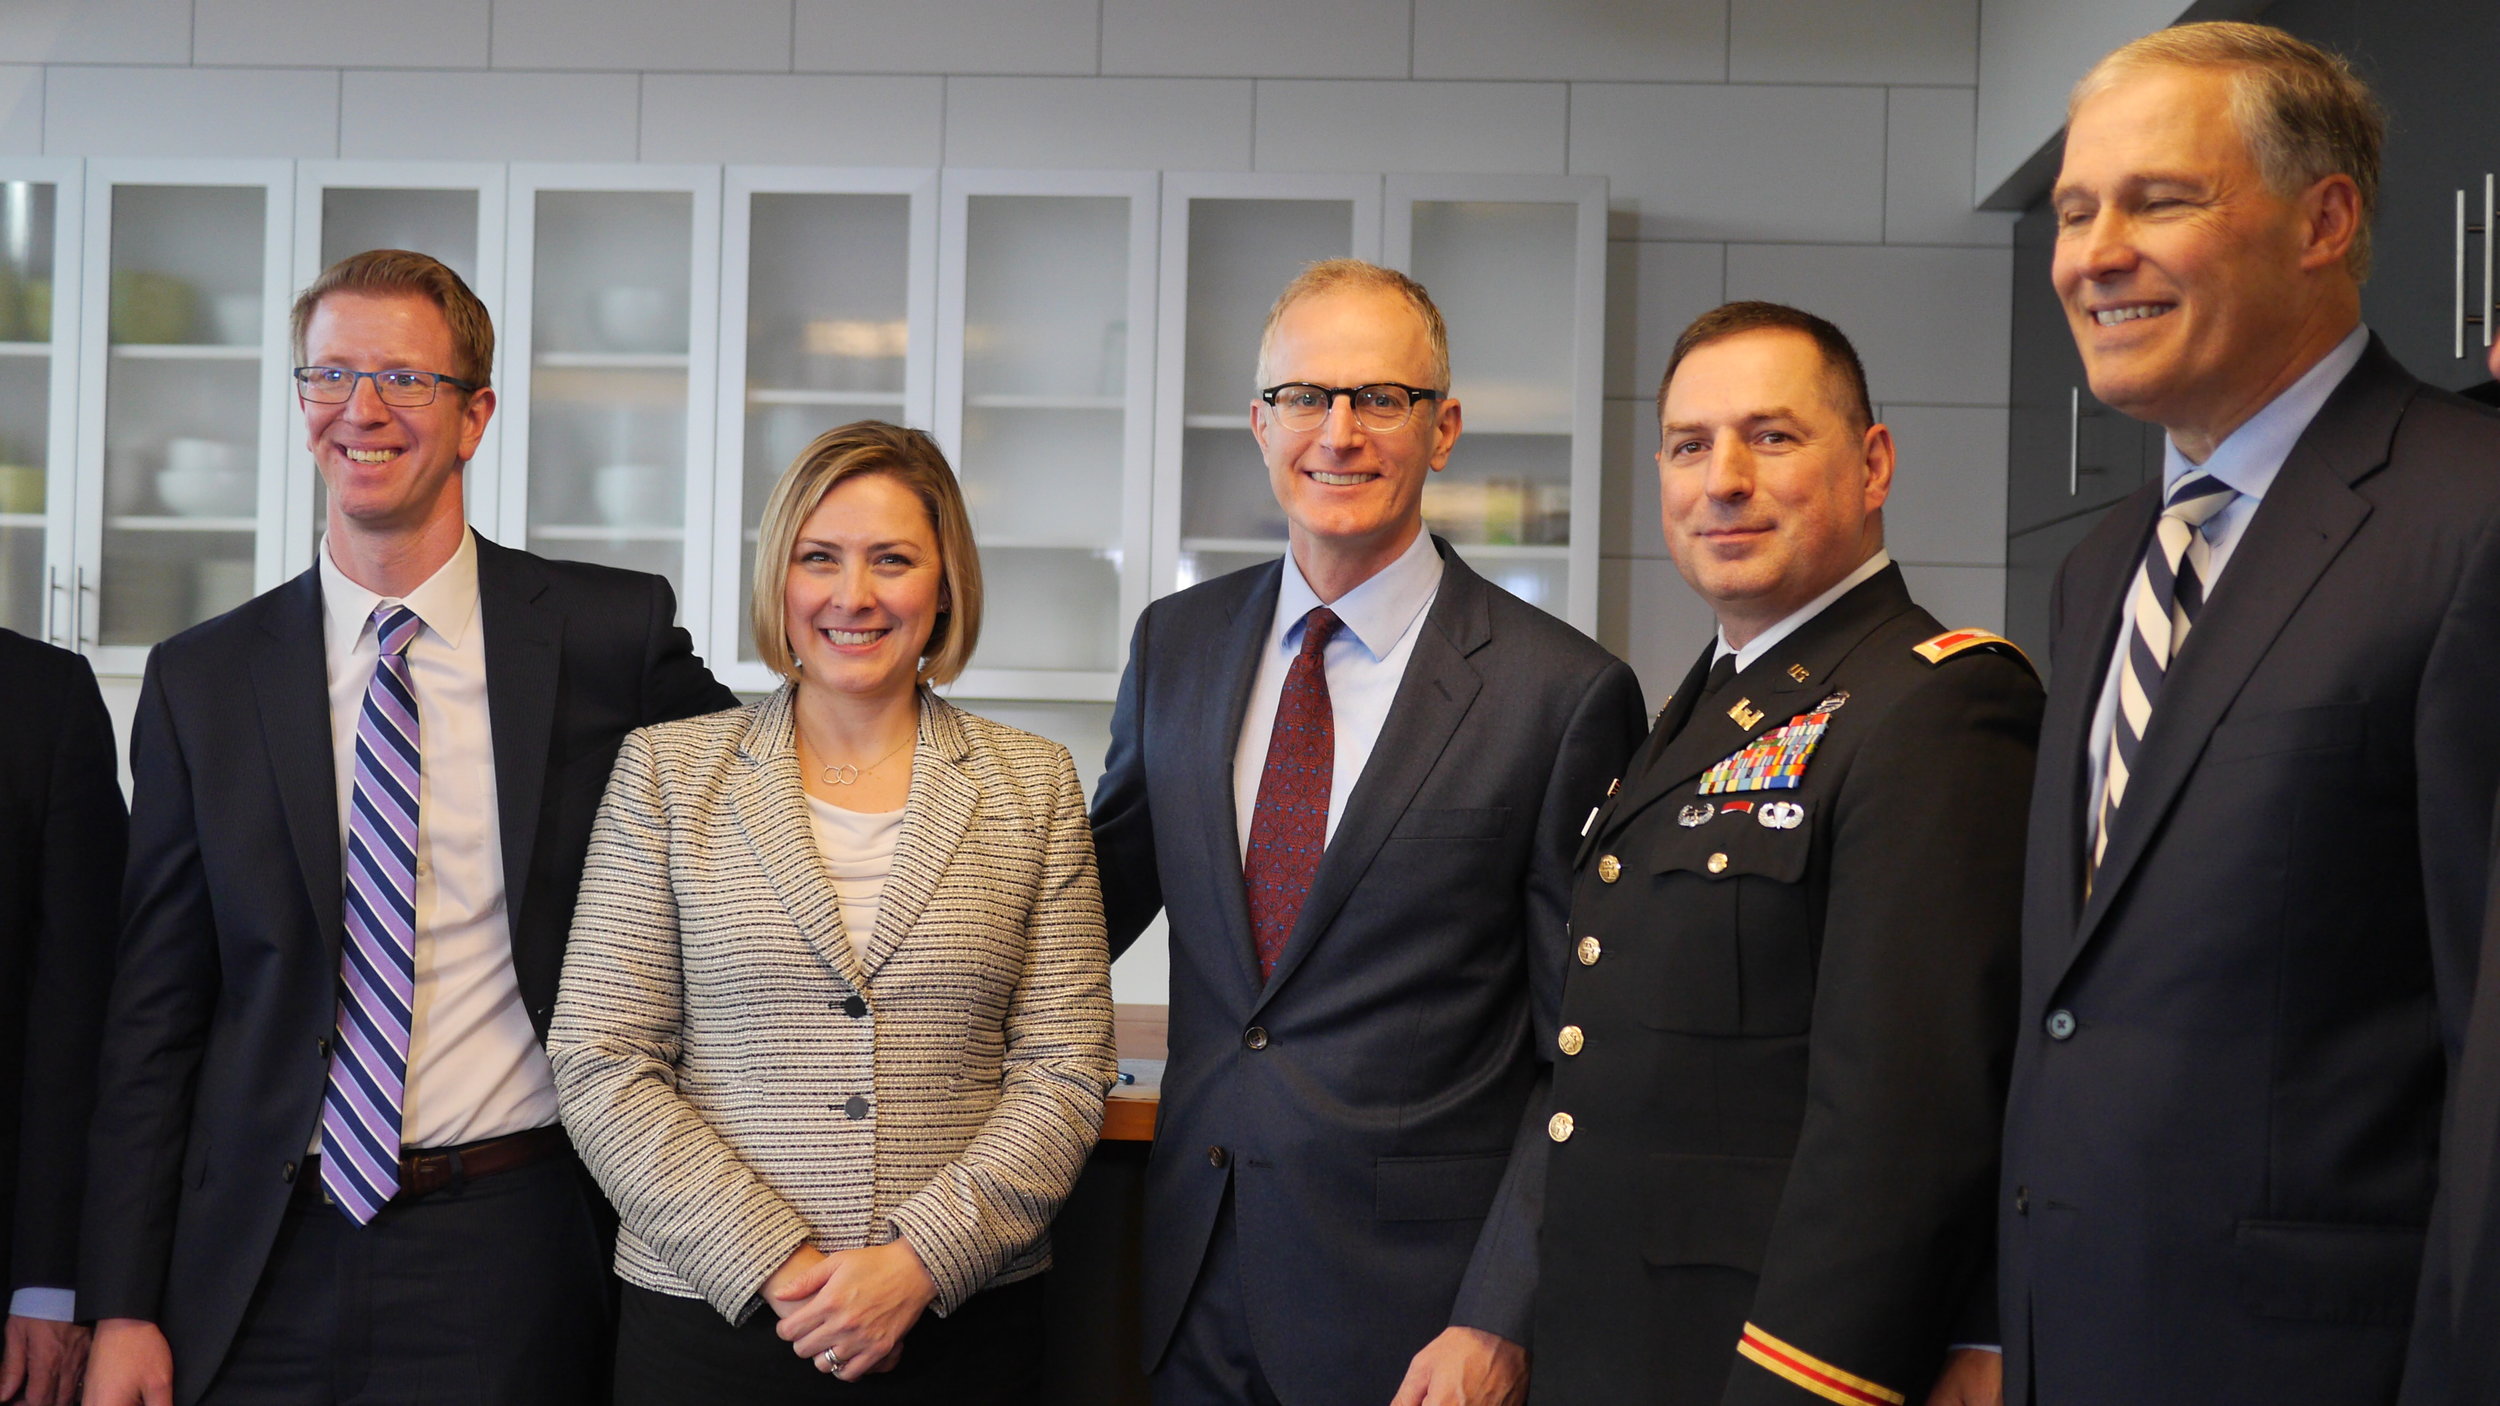  From left to right: Congressmen Derek Kilmer;&nbsp;Christy Goldfuss,&nbsp;White House CEQ Director; Mike Stevens, Conservancy State Director; Colonel Buck, Army Corps of Engineers;&nbsp;Governor Jay Inslee&nbsp; 